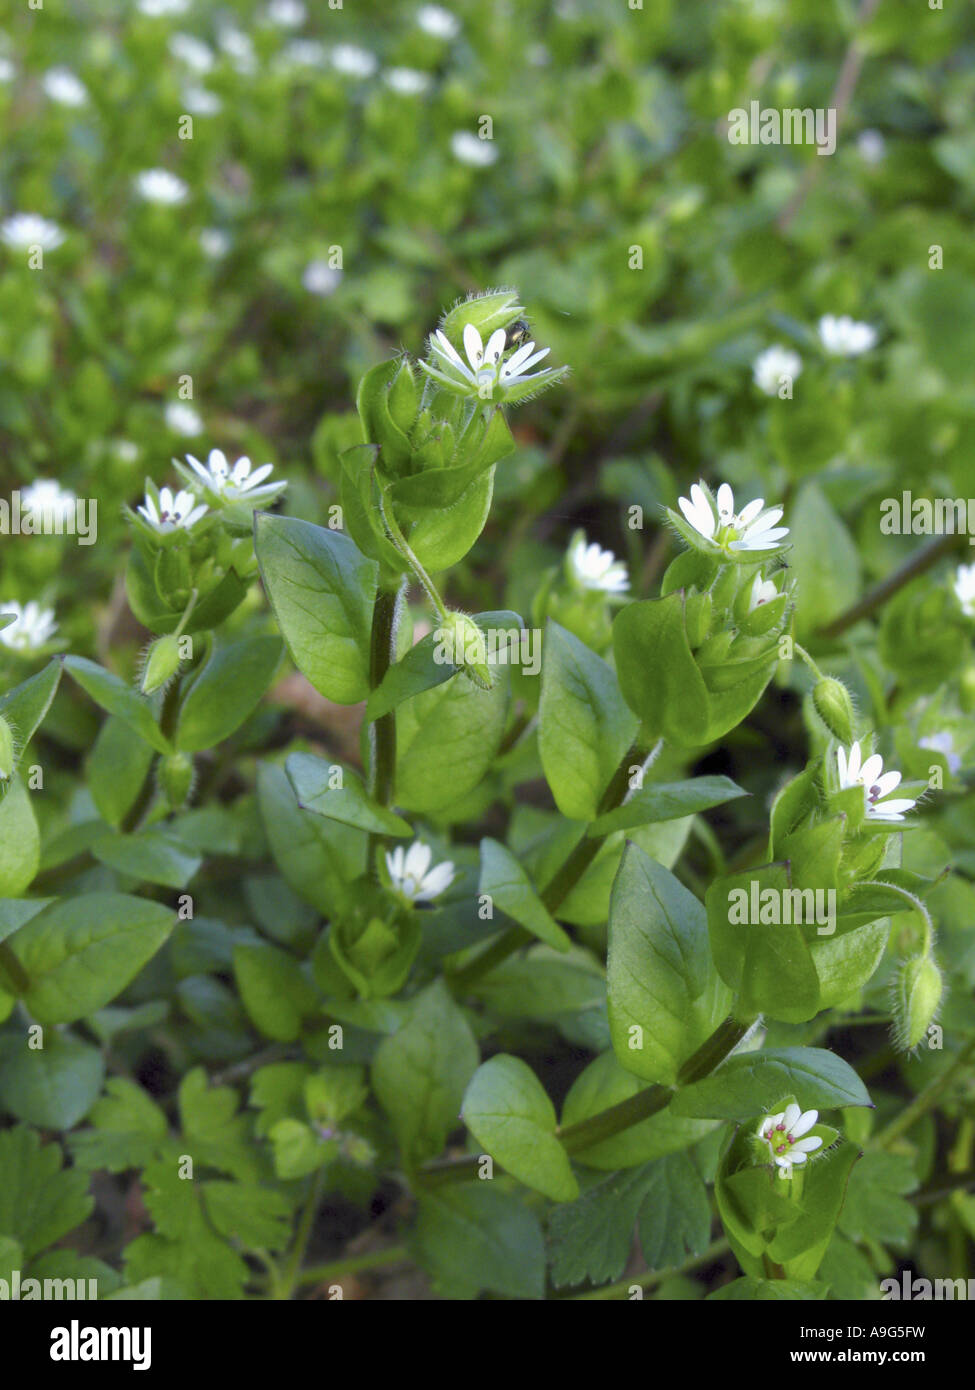 common chickweed (Stellaria media), blooming plants Stock Photo